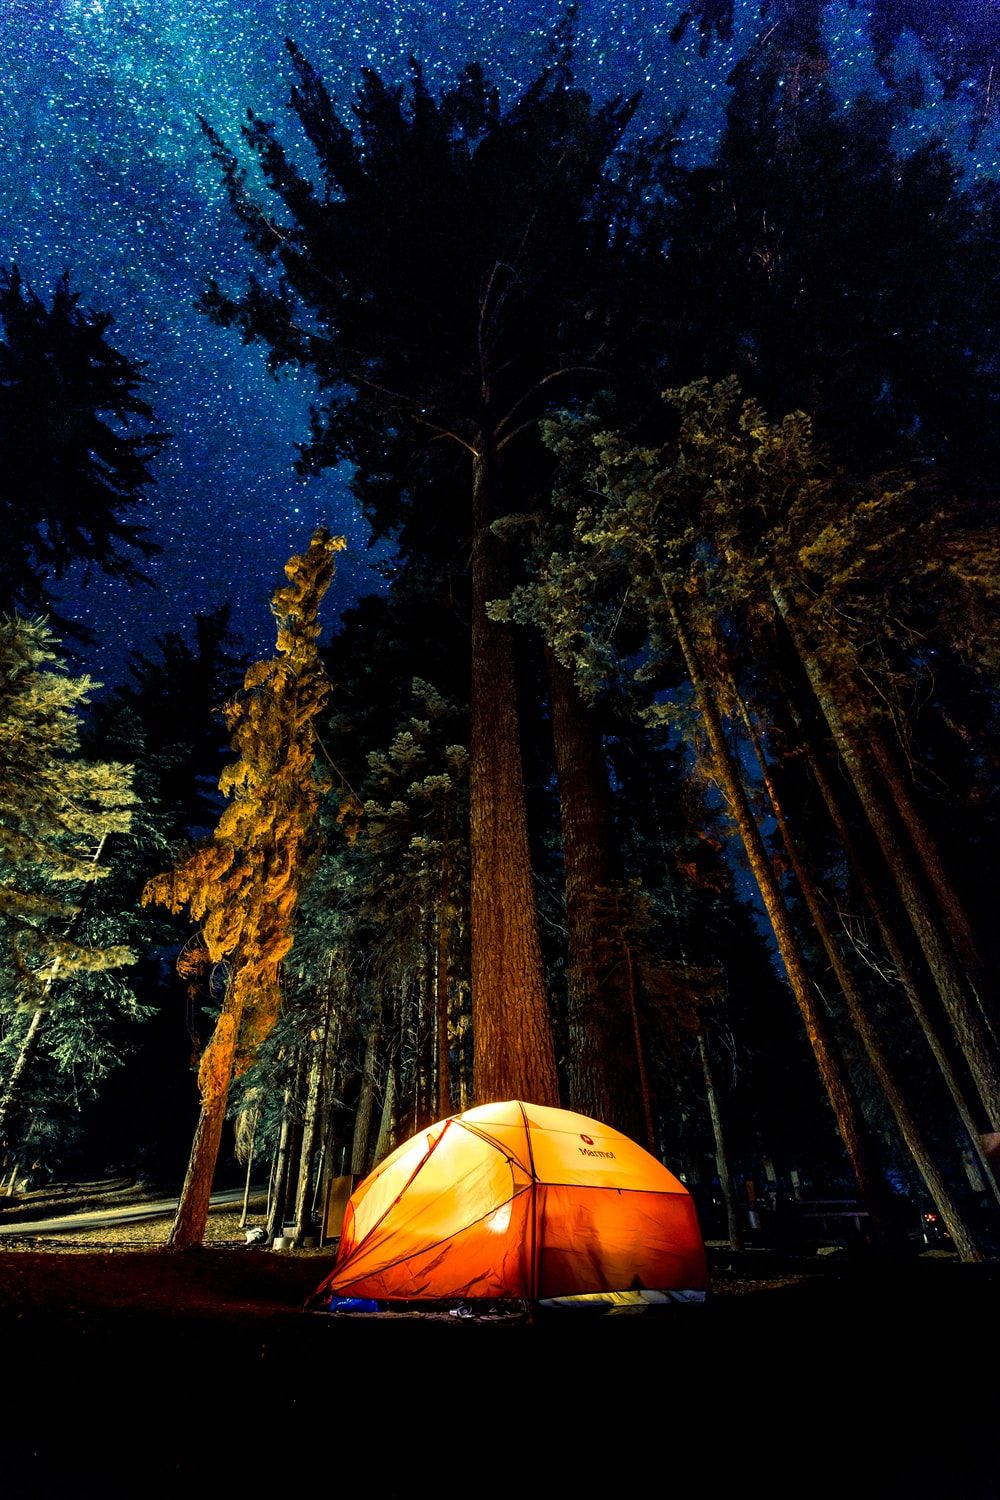 A camping tent in the forest under a starry sky - Camping